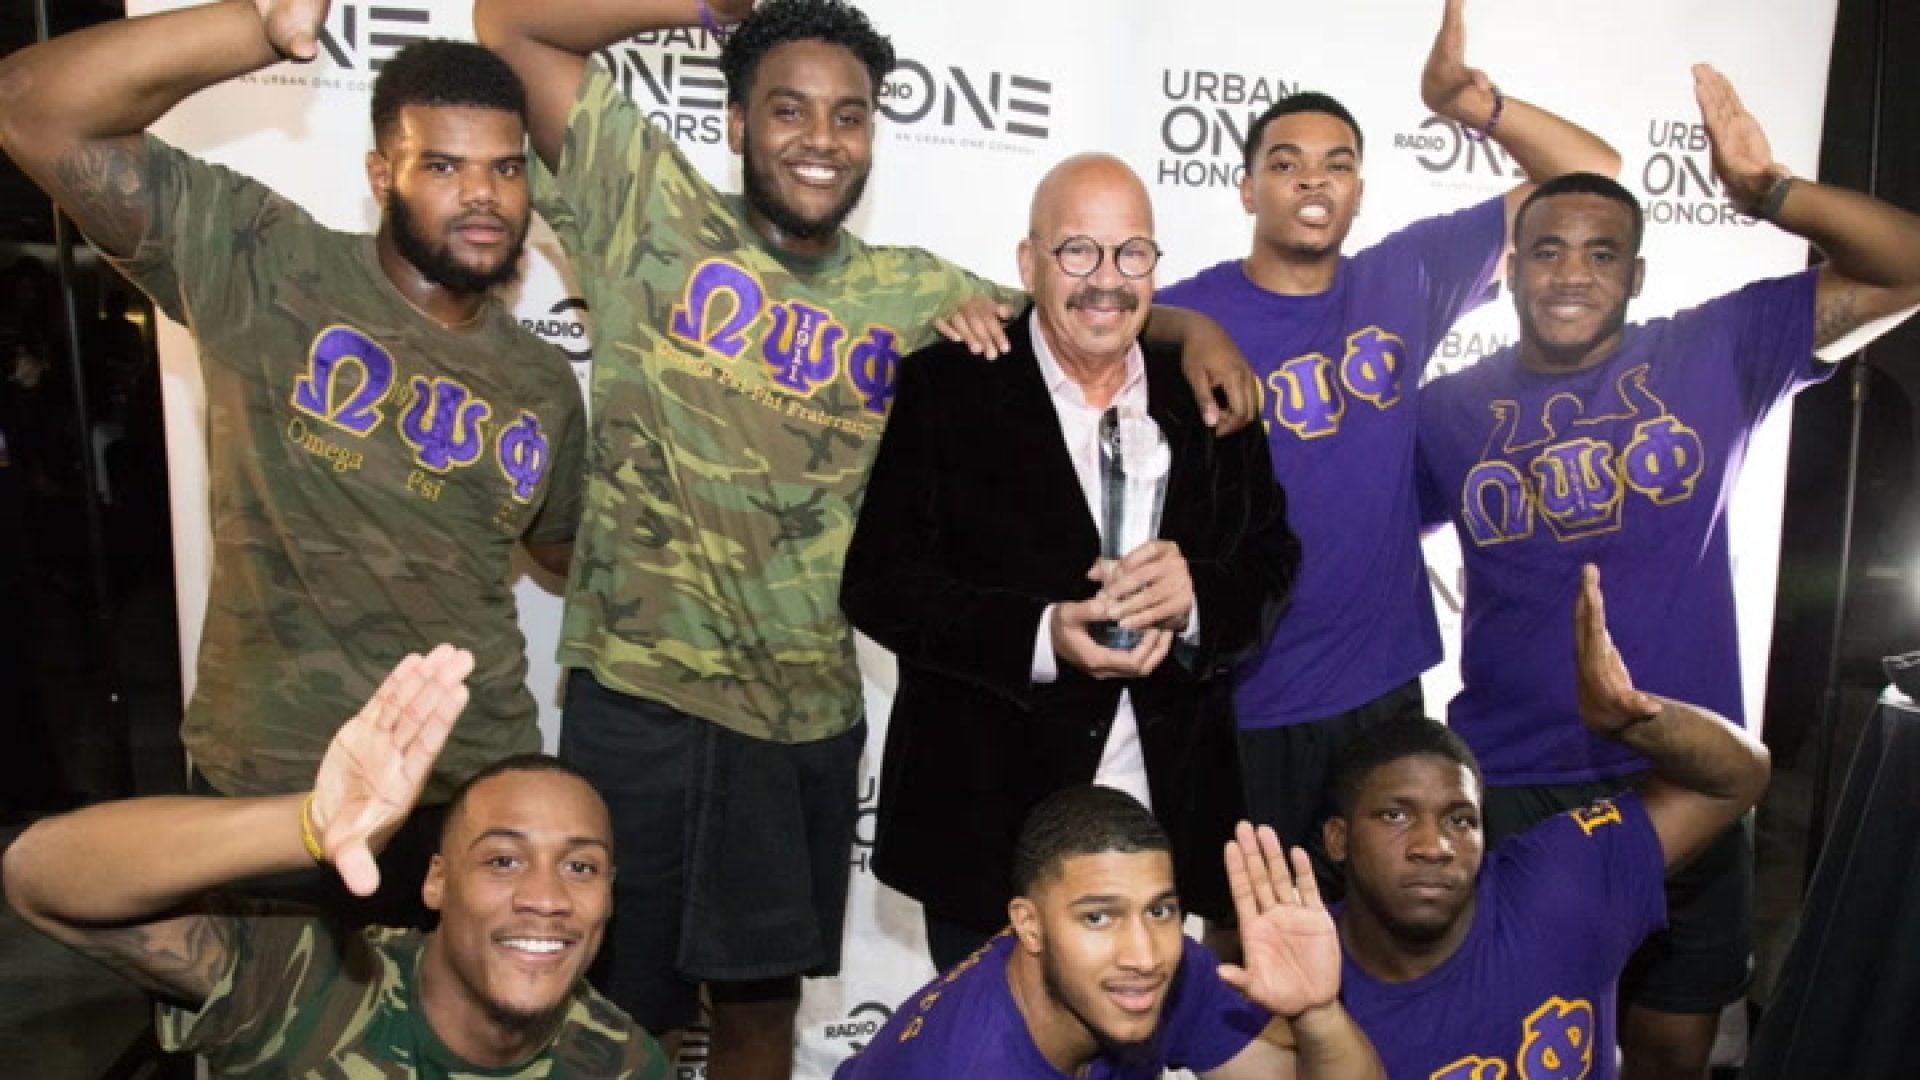 WATCH: In My Feed -Did You Know These Black Men Were In Omega Psi Phi Fraternity?